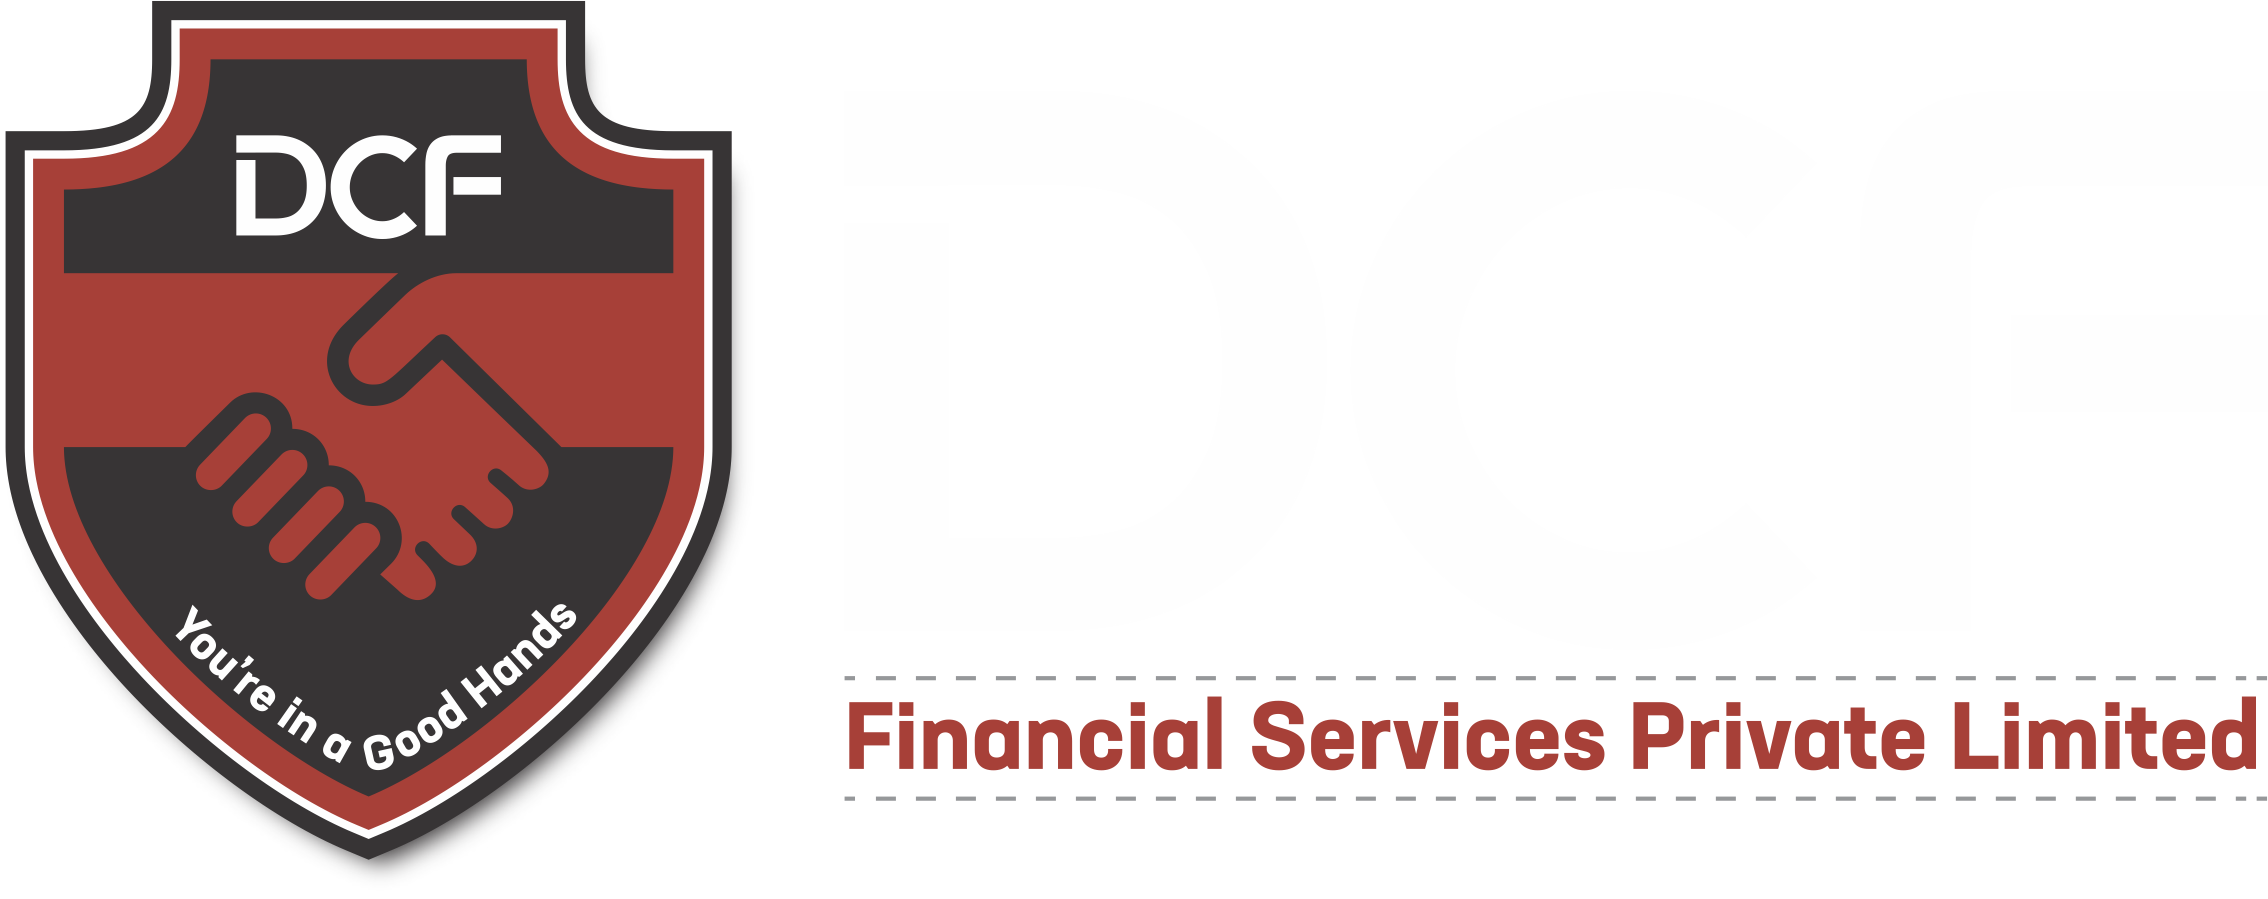 DCF Financial Services Private Limited Our financial expertise at